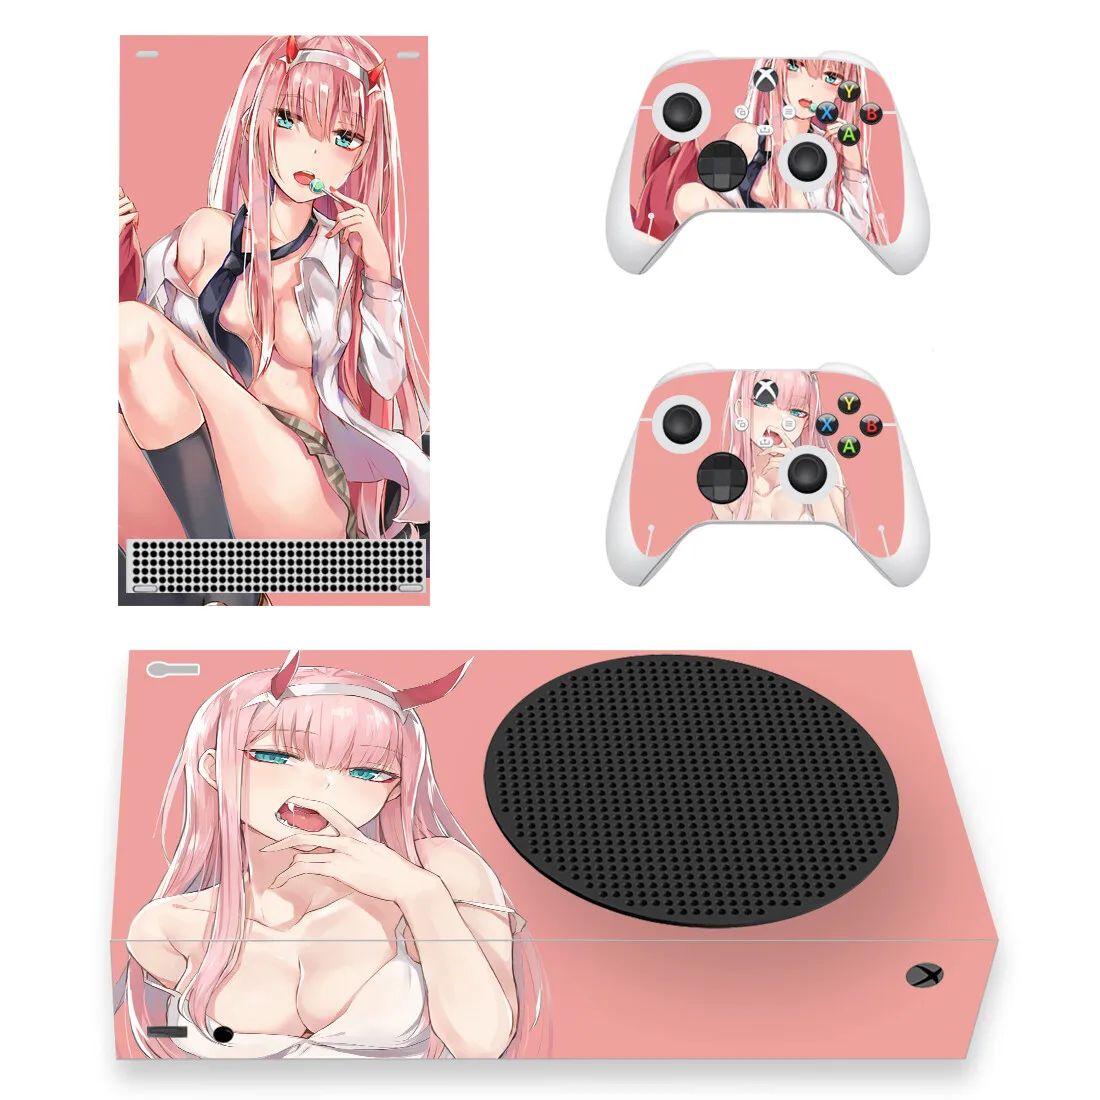 

Anime Cute Girl Zero Two Skin Sticker Decal Cover for Xbox Series S Console and Controllers Xbox Series Slim Skin Sticker Vinyl